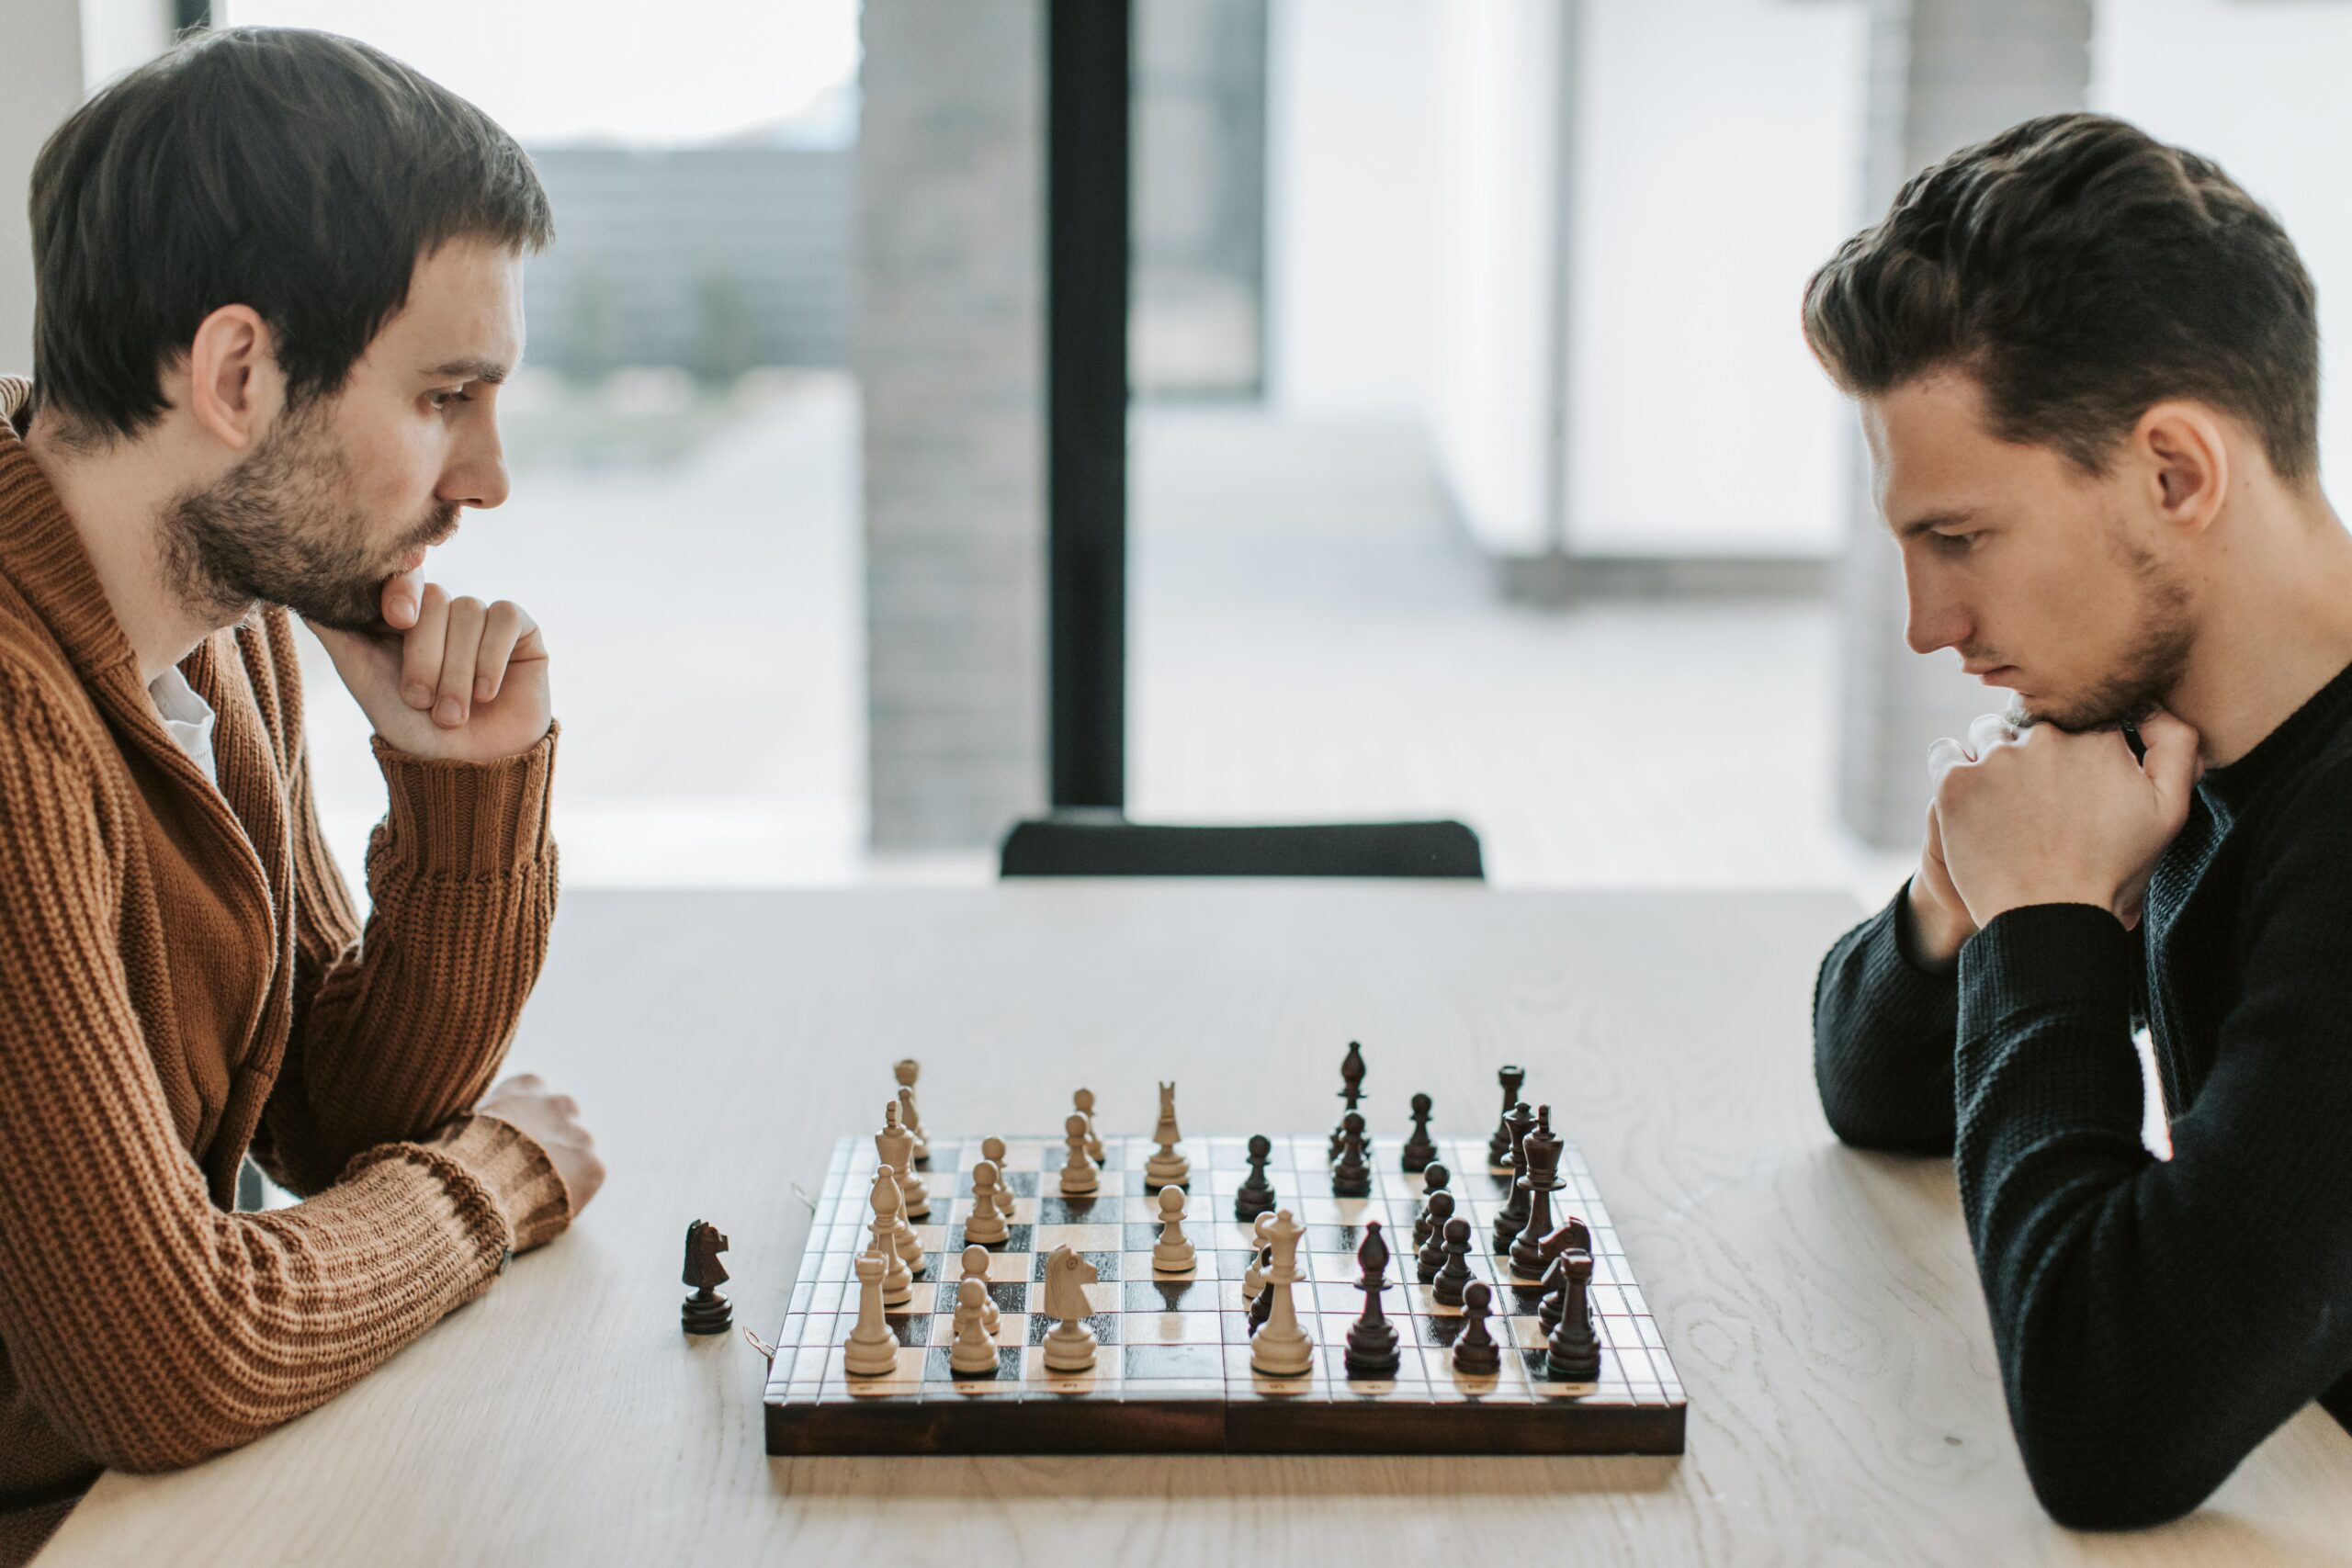 Strategic thinking in chess games